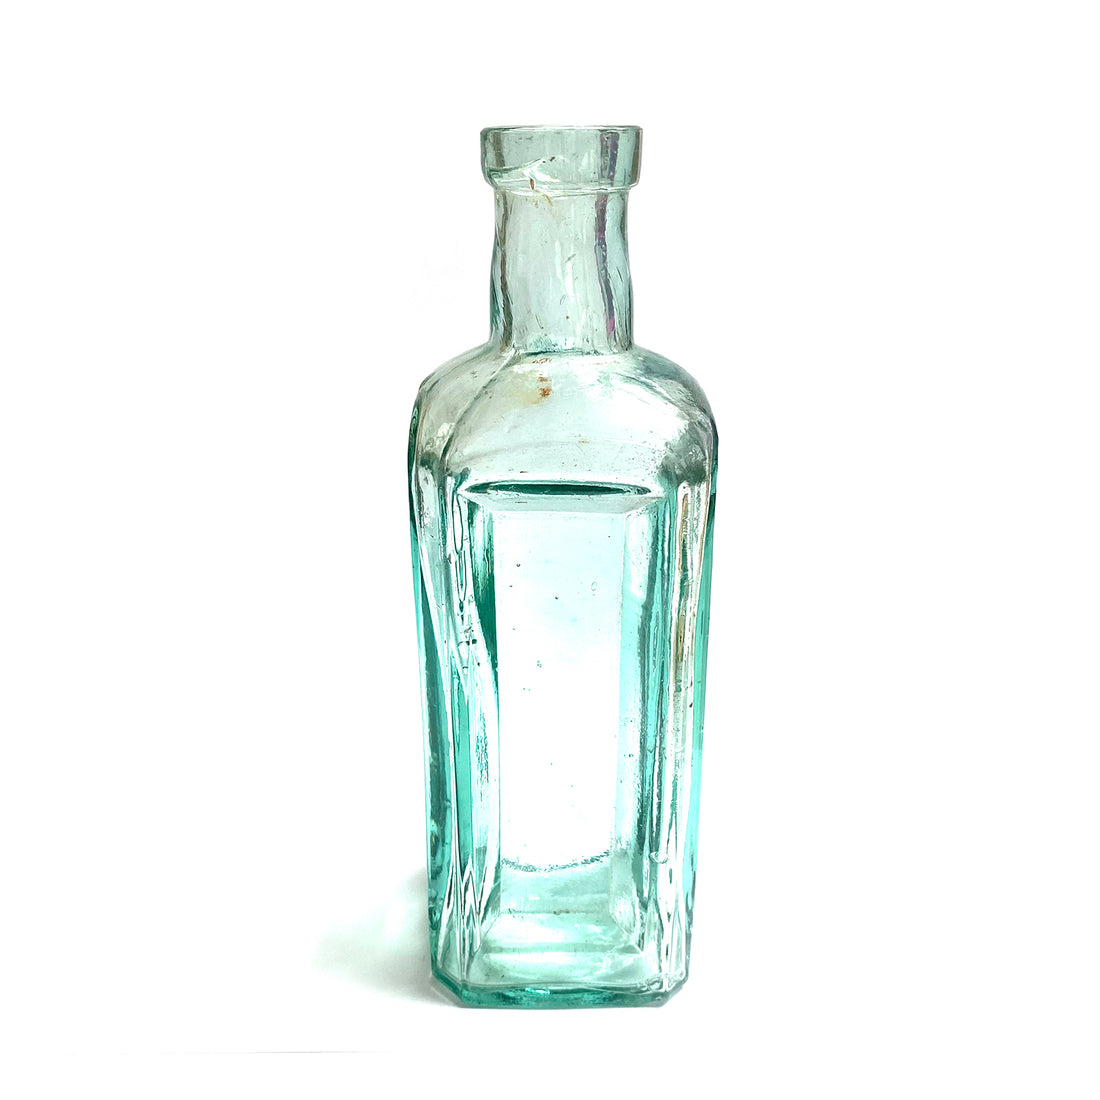 VINTAGE RECYCLED GLASS BOTTLES